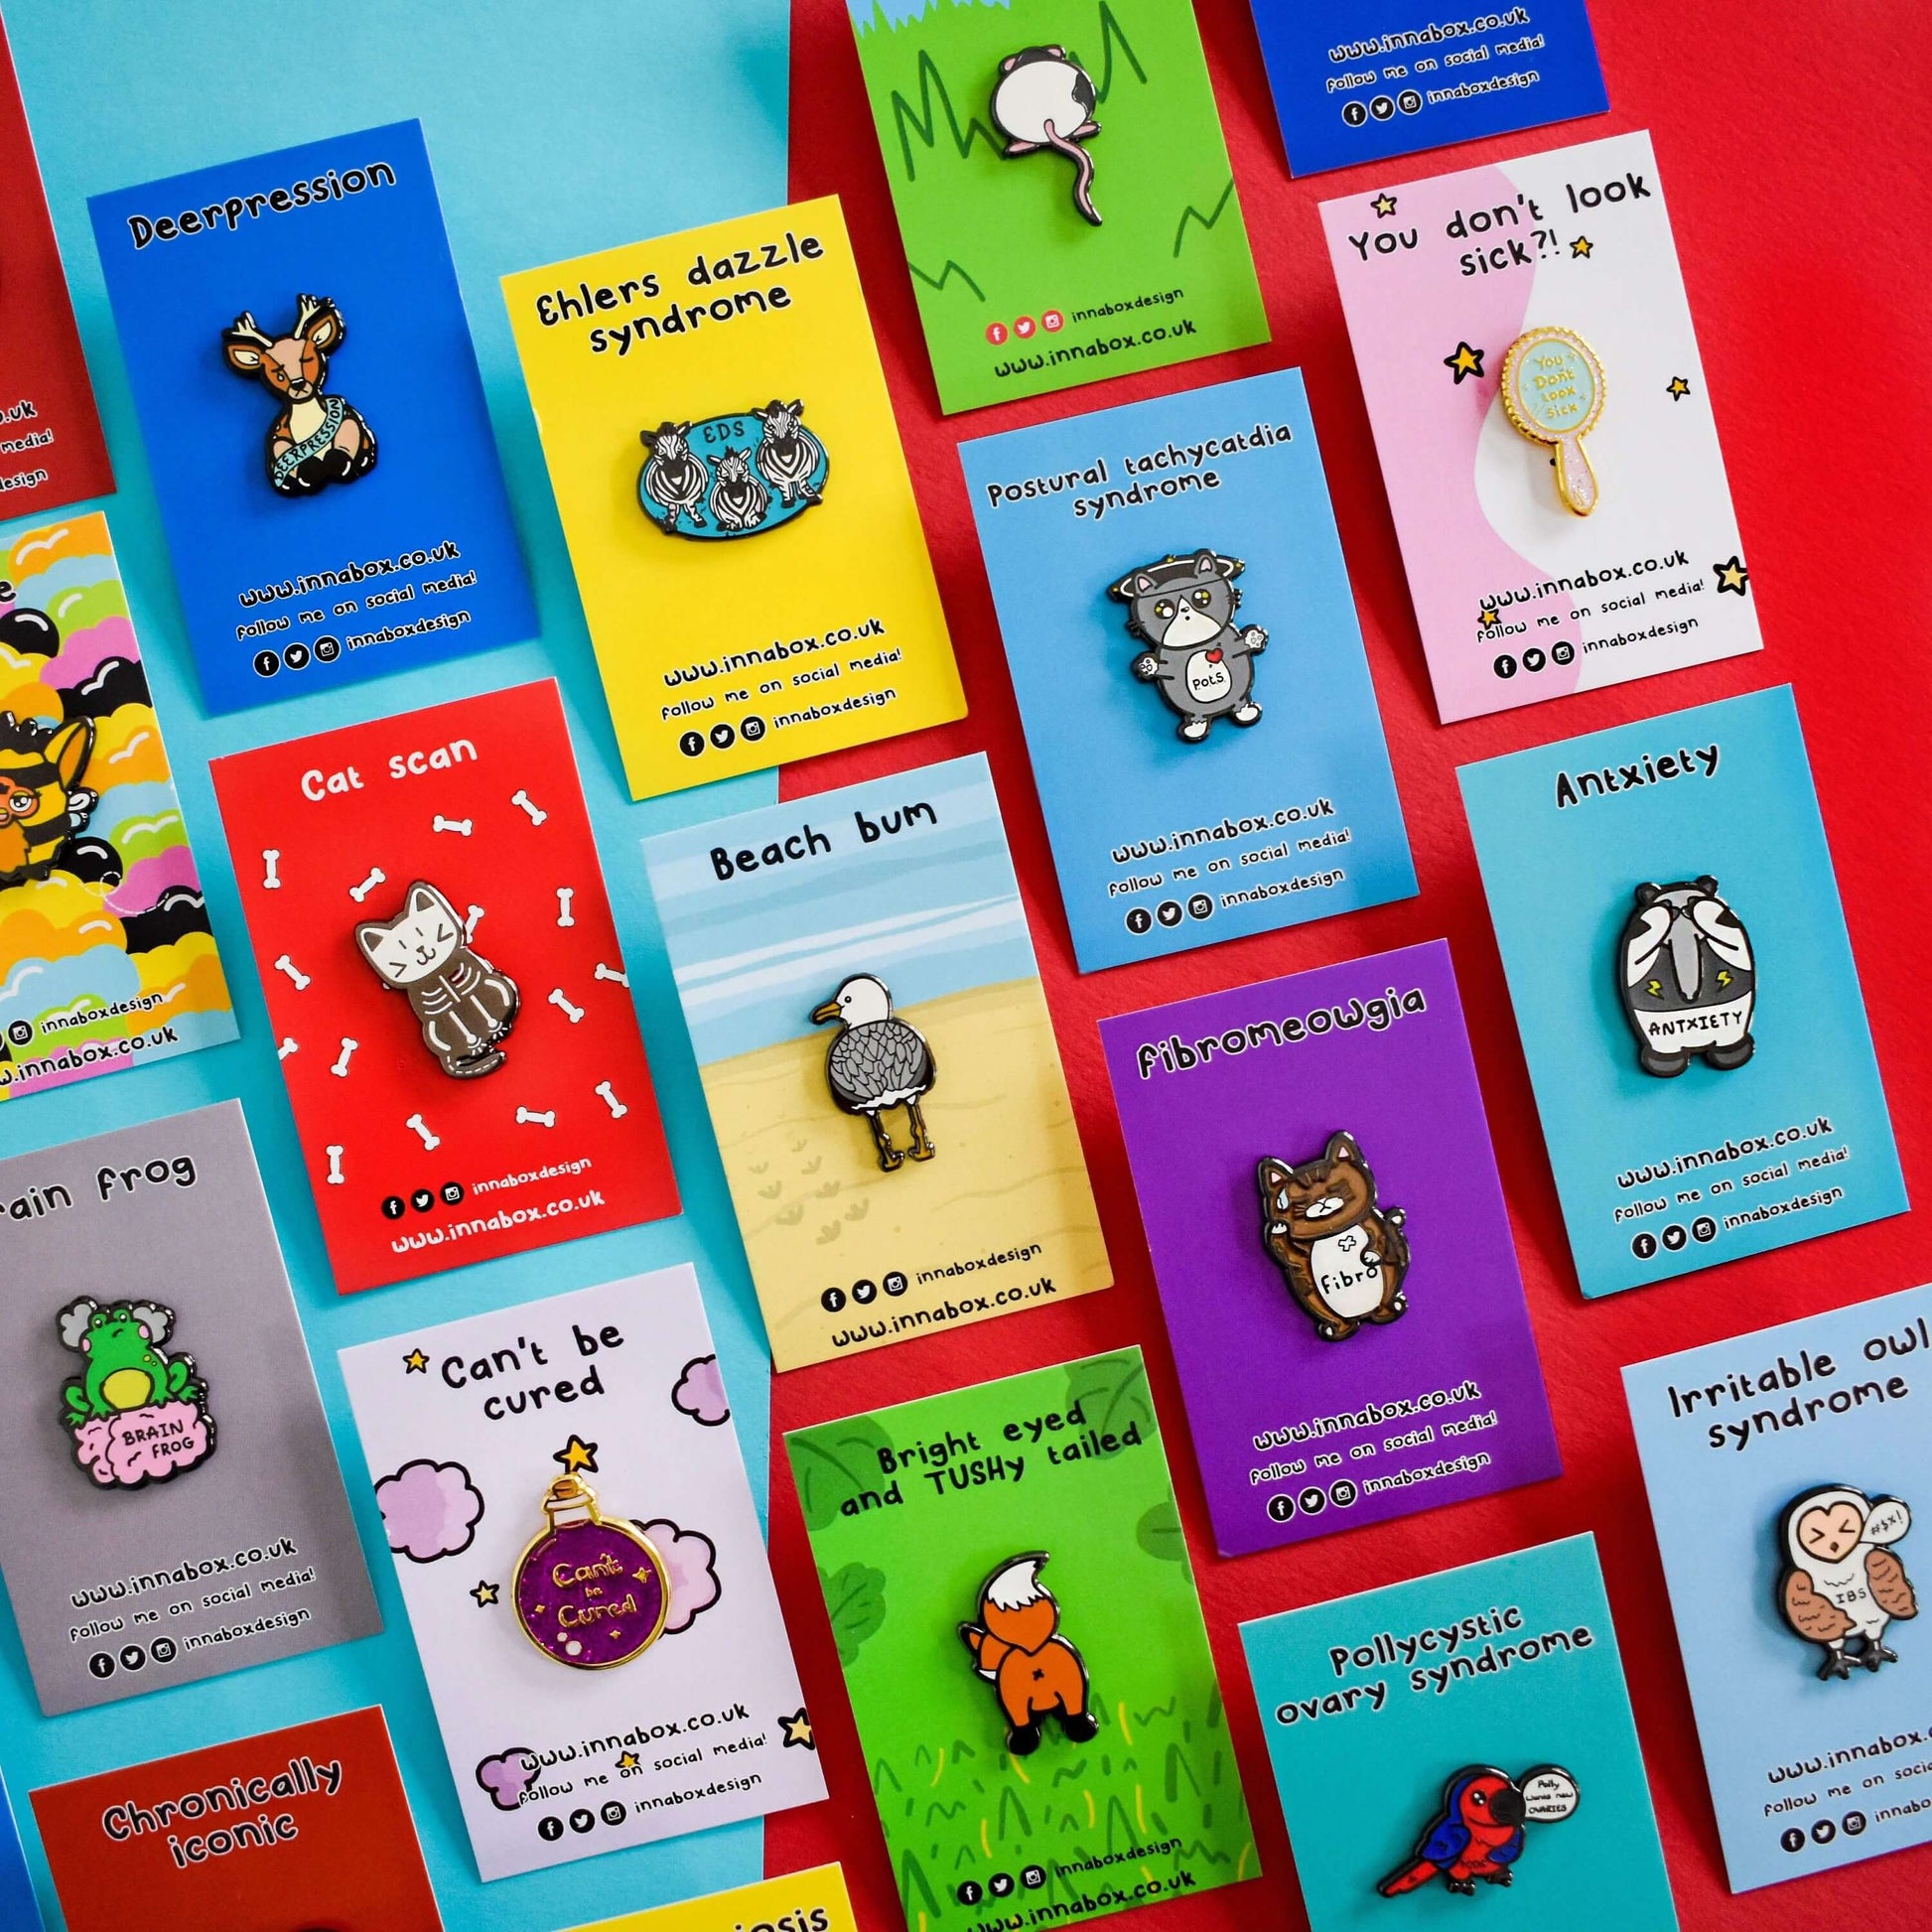 an array on Innabox enamel pins on backing card shown on a red and blue background. The enamel pins are designed to raise awareness for chronic illnesses